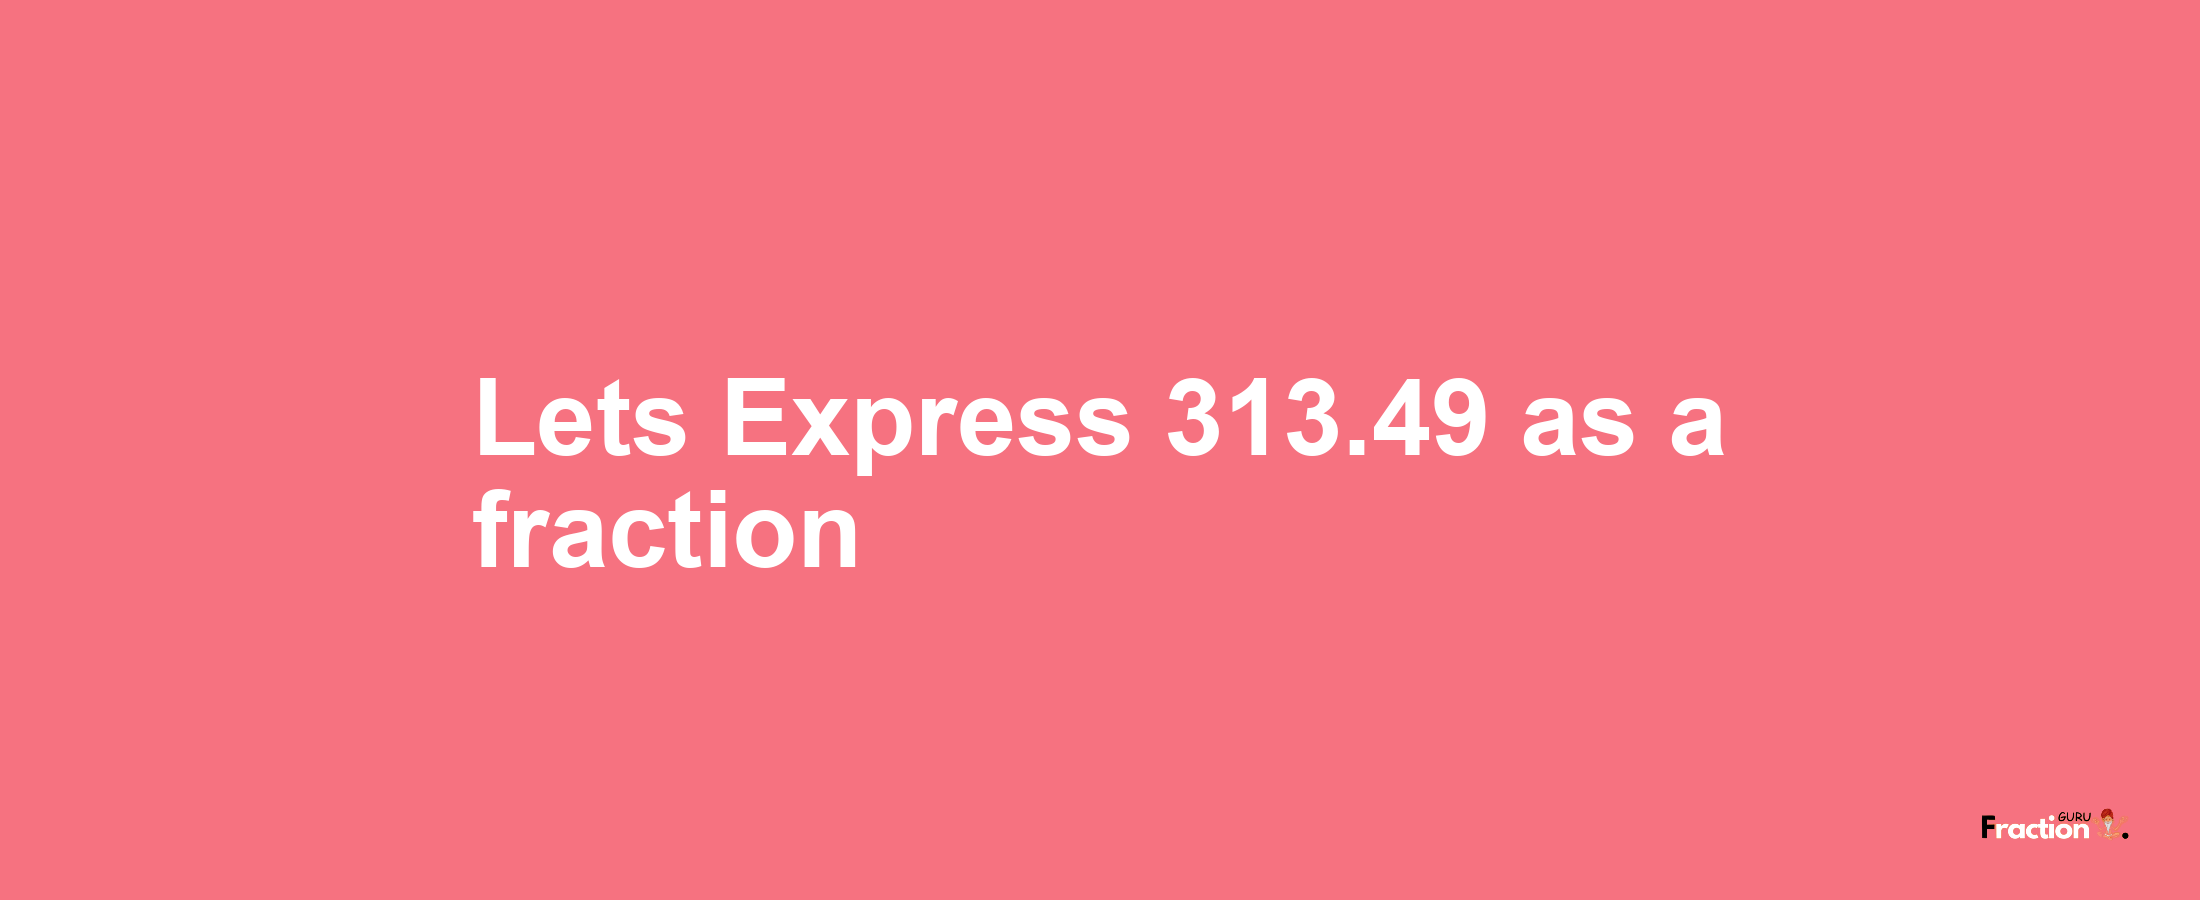 Lets Express 313.49 as afraction